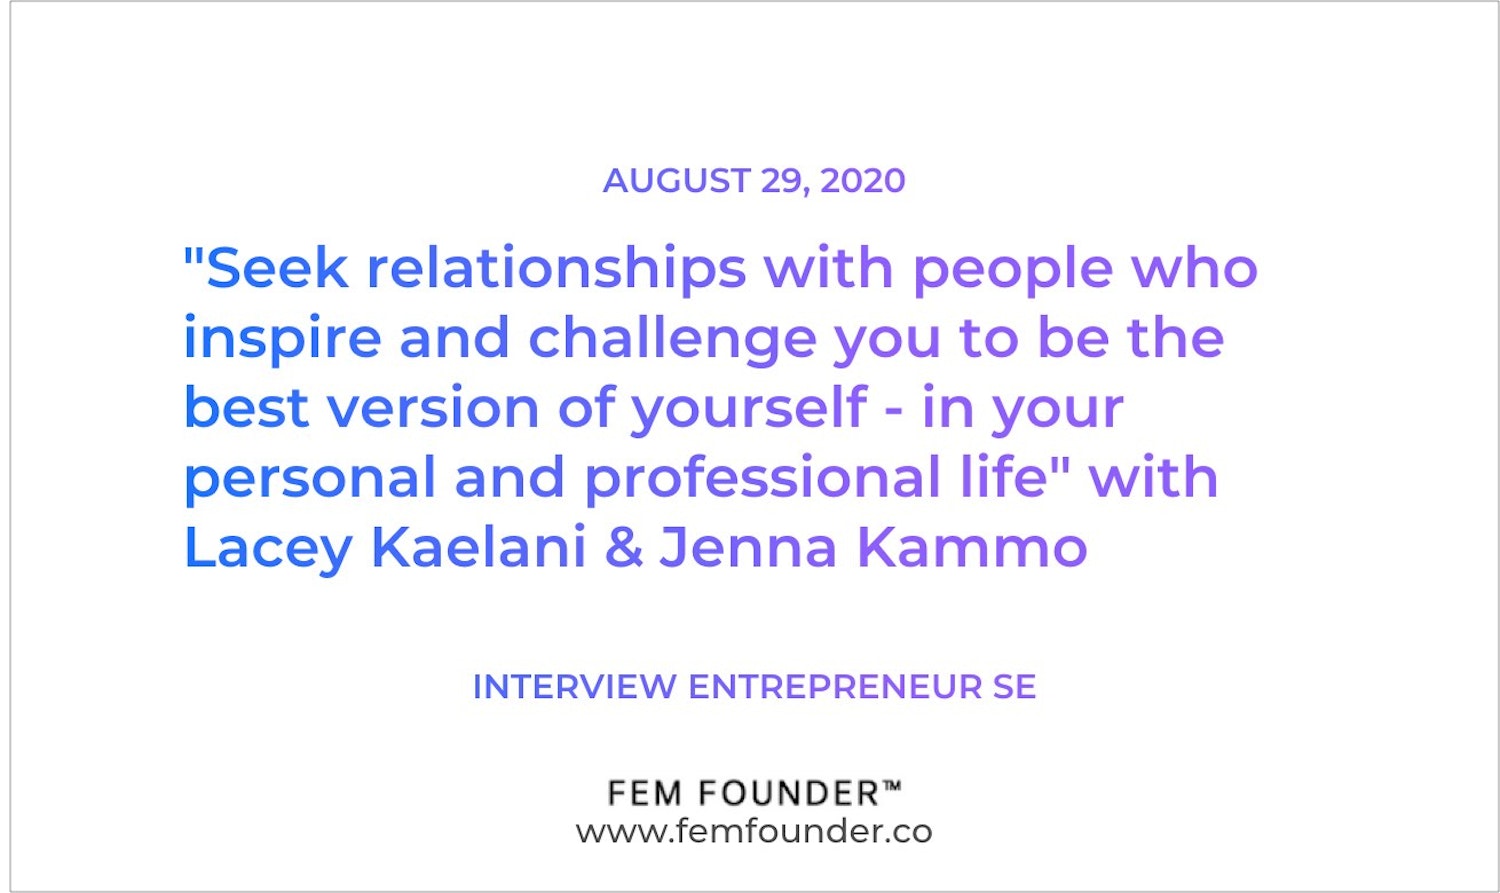 Cover Image for "Seek relationships with people who inspire and challenge you to be the best version of yourself - in your personal and professional life" with Lacey Kaelani & Jenna Kammo